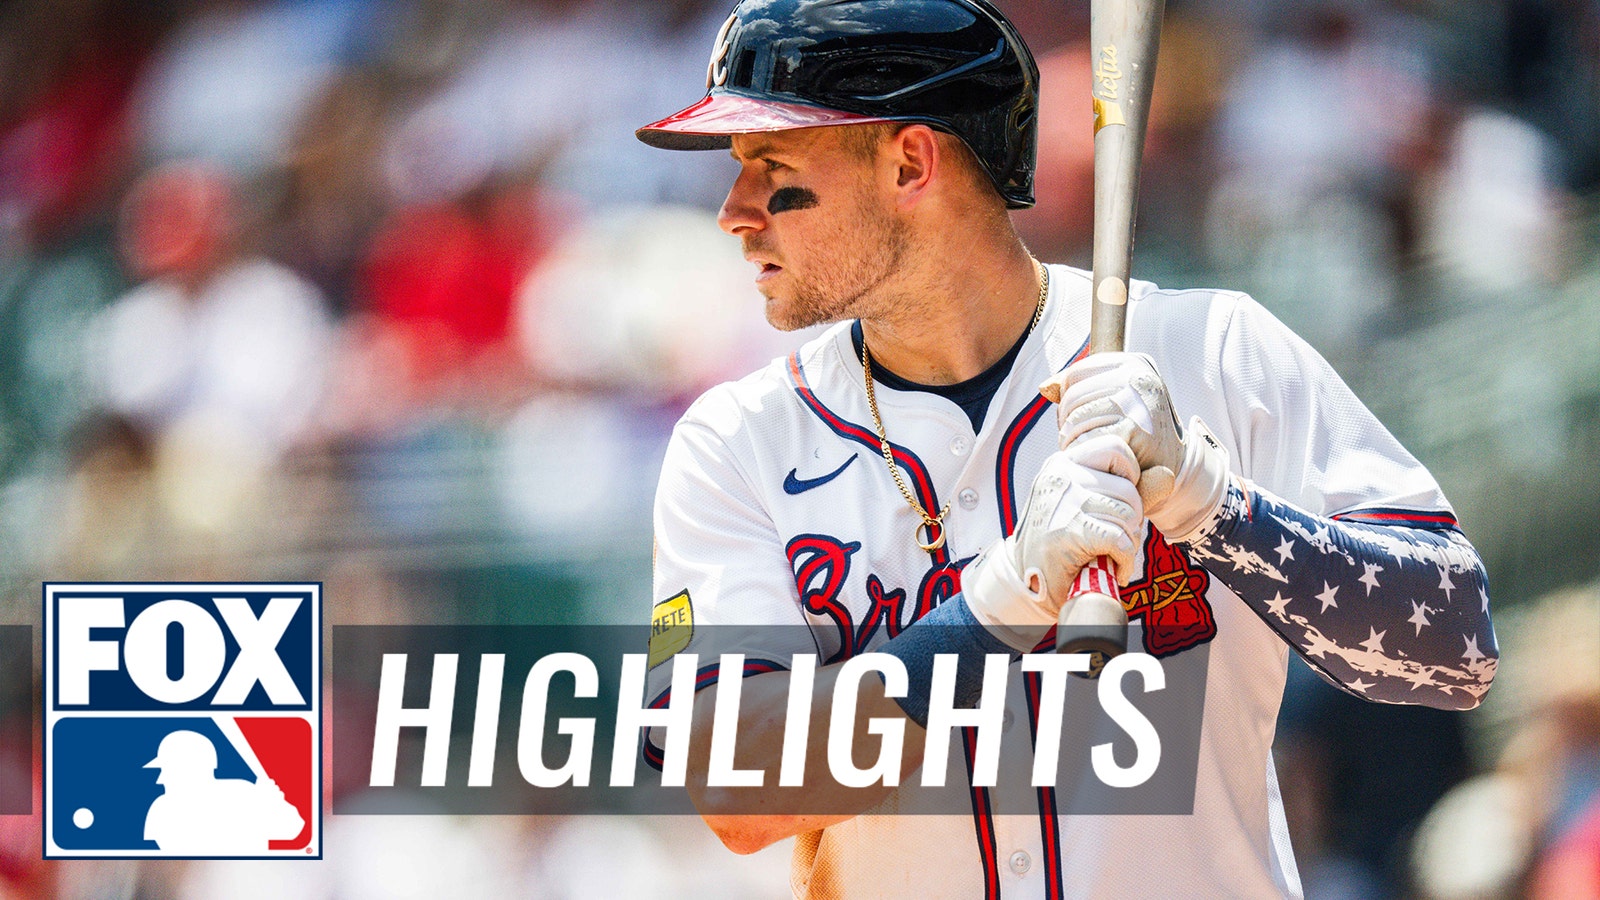 Highlights from Braves' 6-0 win vs. Phillies